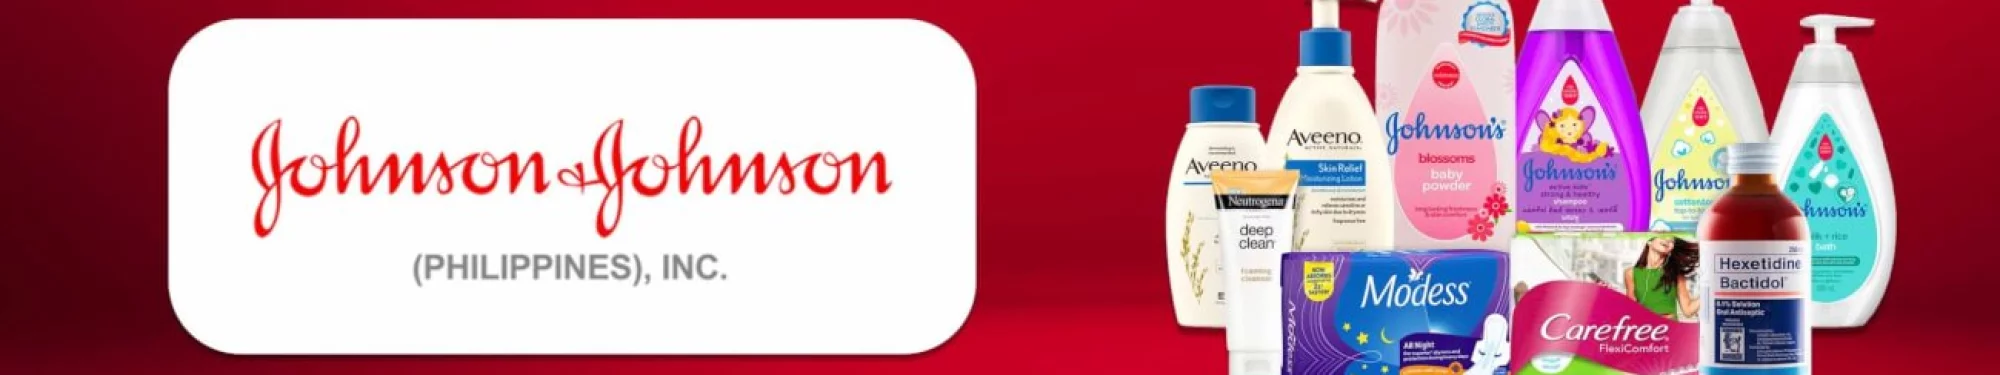 1-JNJ-RED-BANNER-scaled